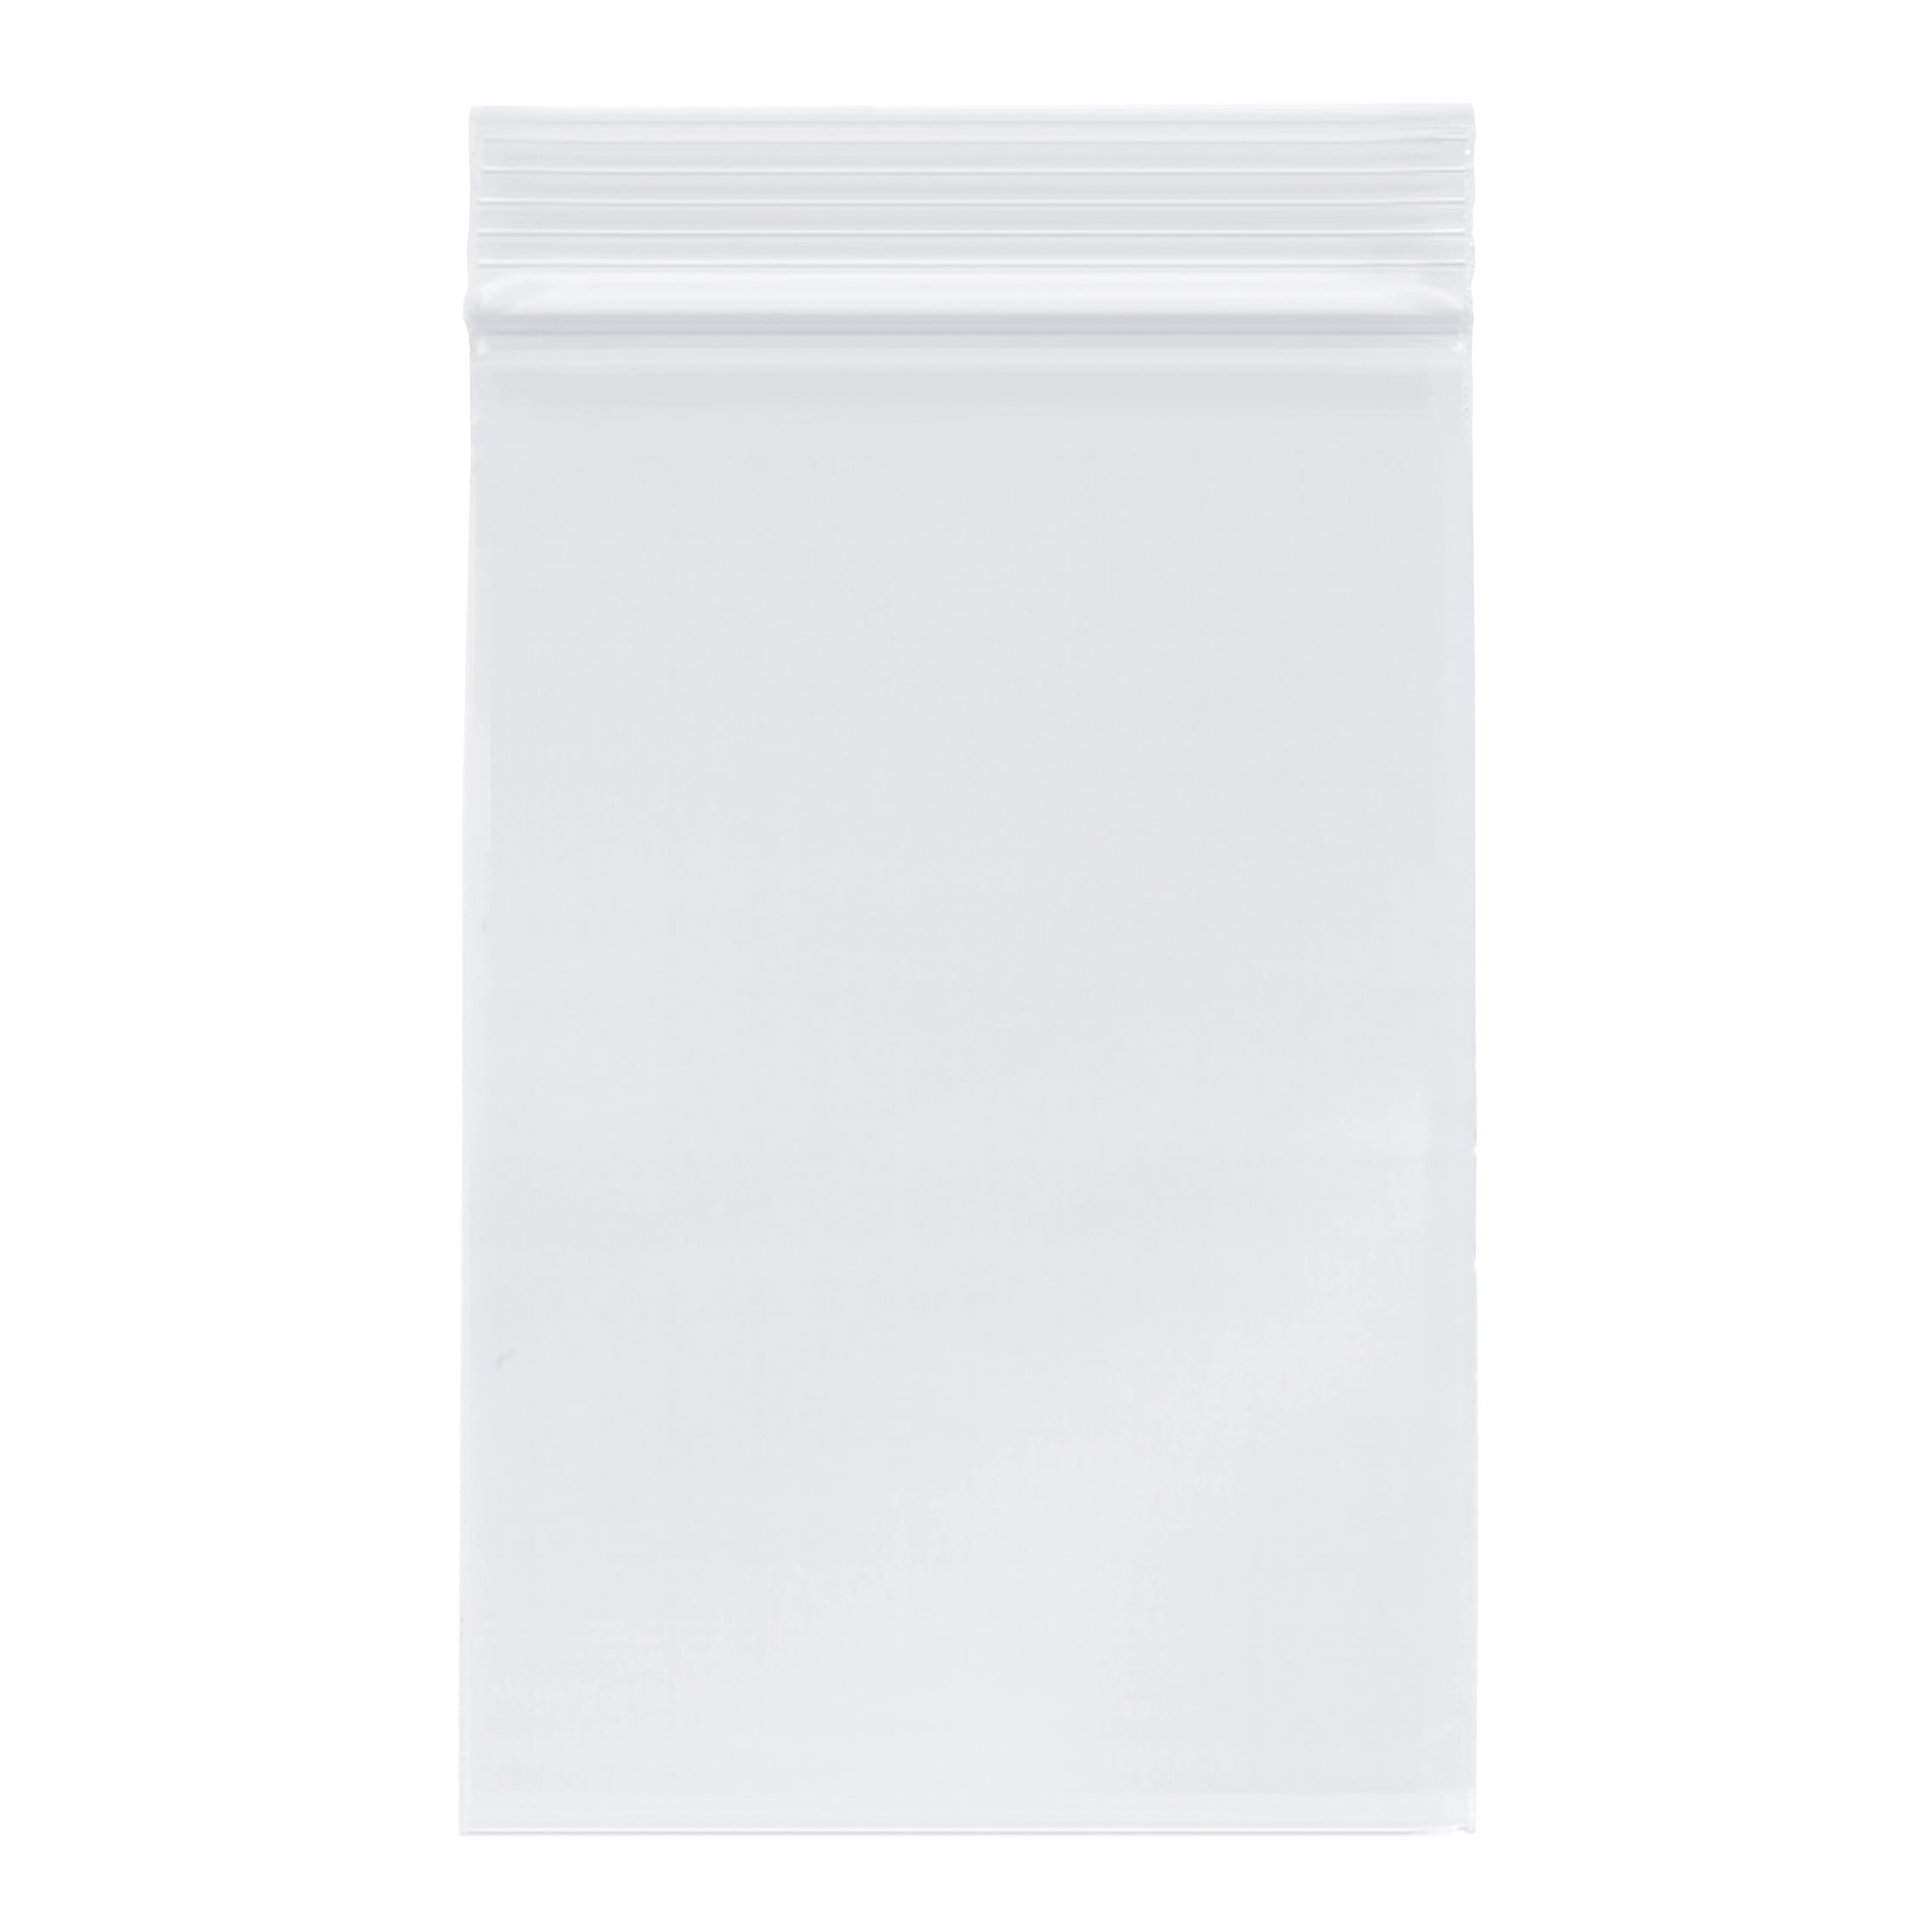 300 3x7 Reclosable Resealable Clear Zipper Poly Plastic Bags 2Mil 3"x 7" inch 